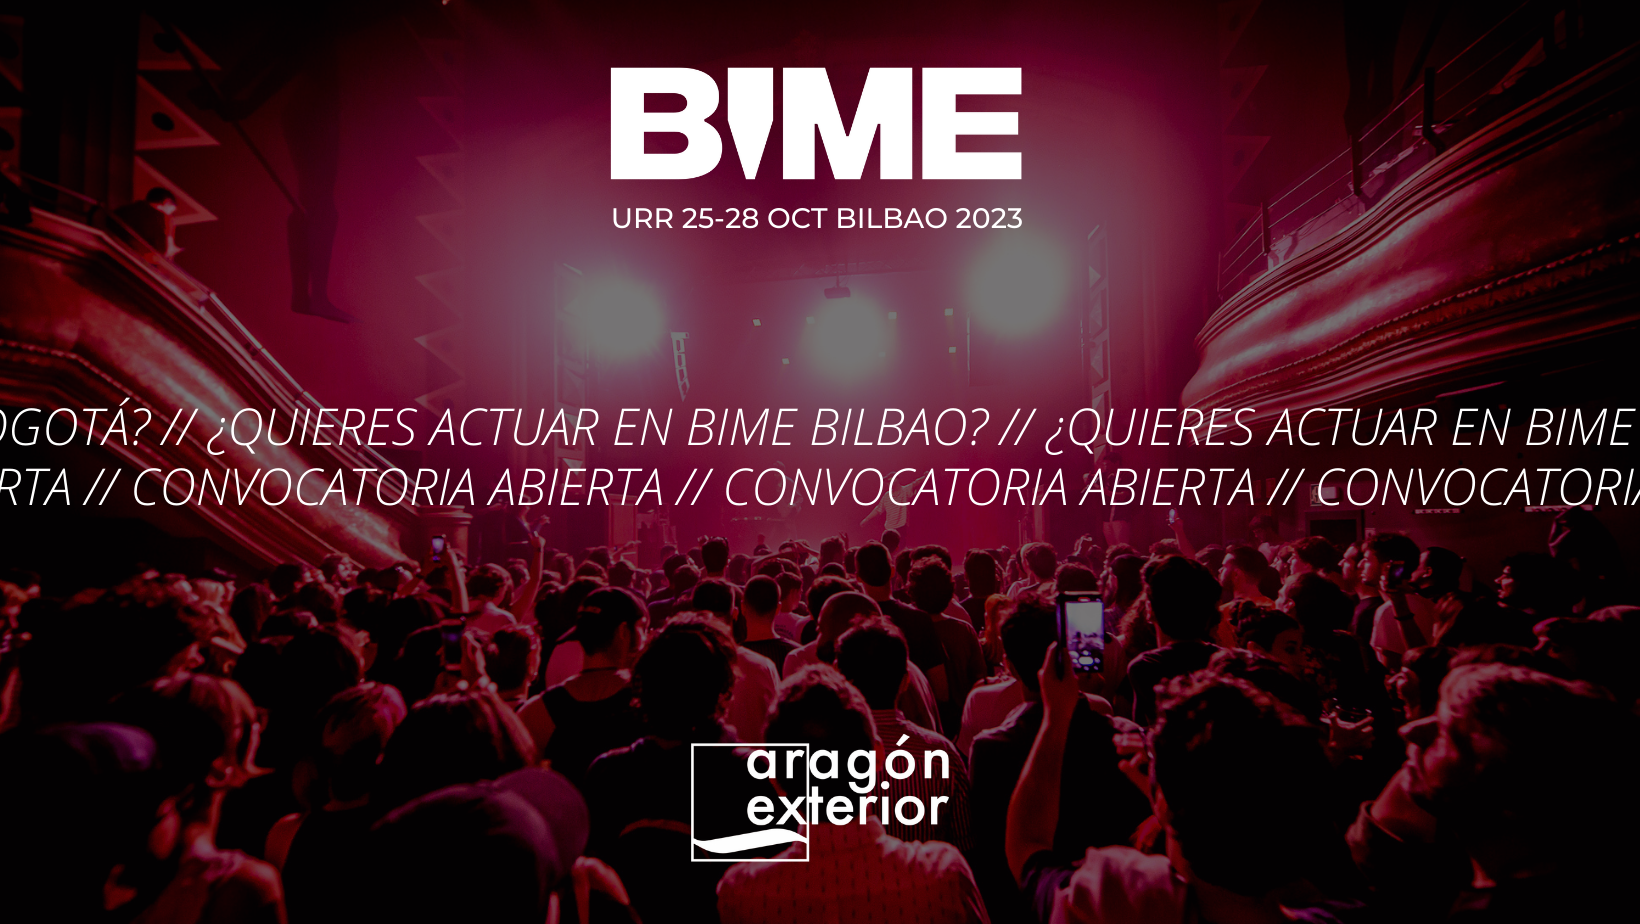 BIME BILBAO 2023 call for Aragonese bands and soloists is now open!